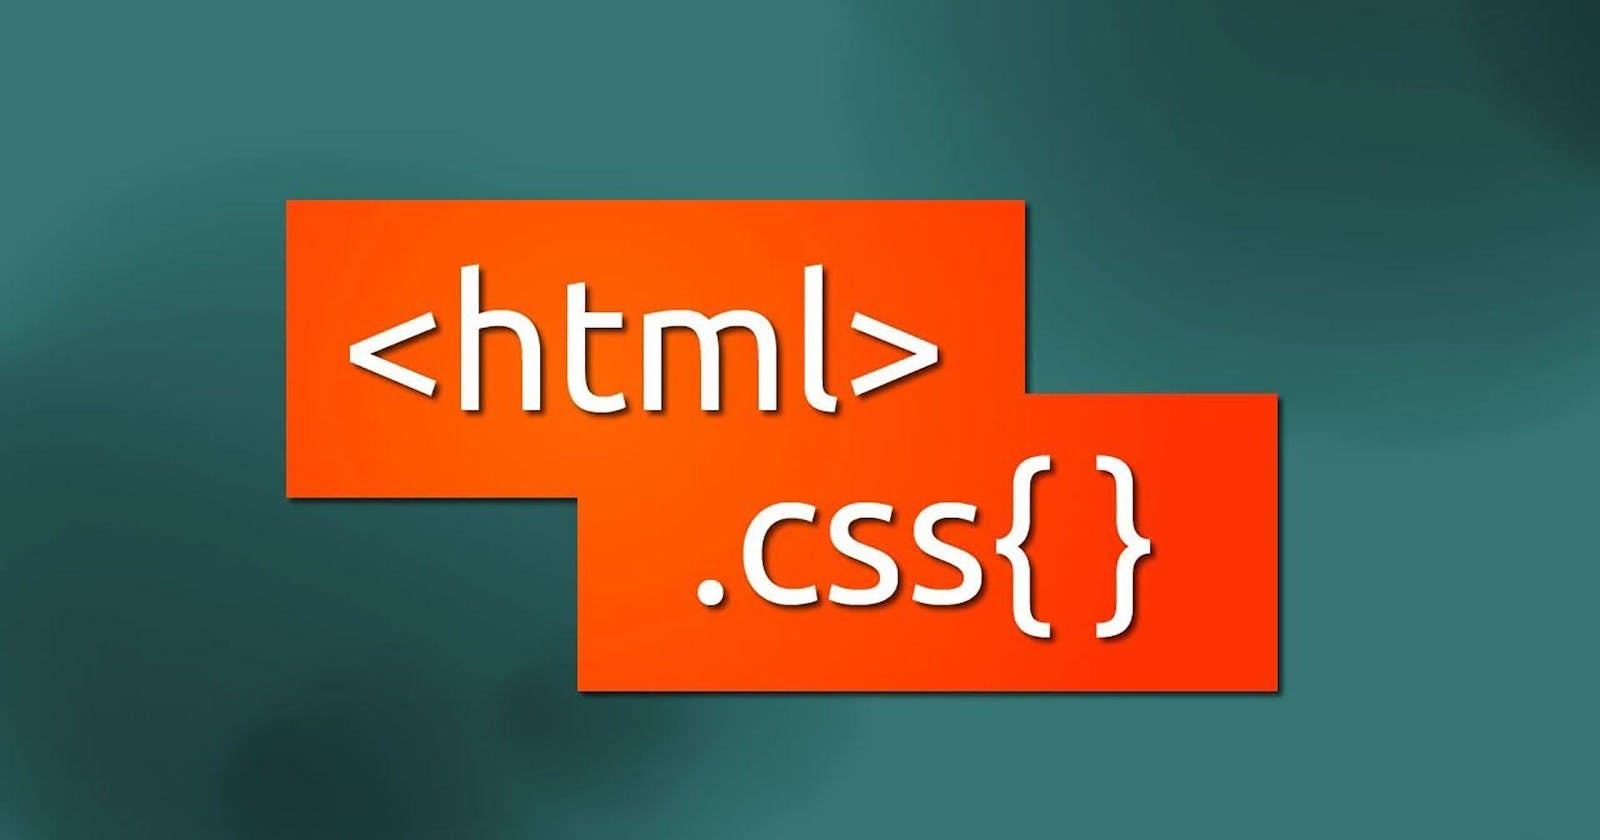 Best websites/blogs to learn CSS